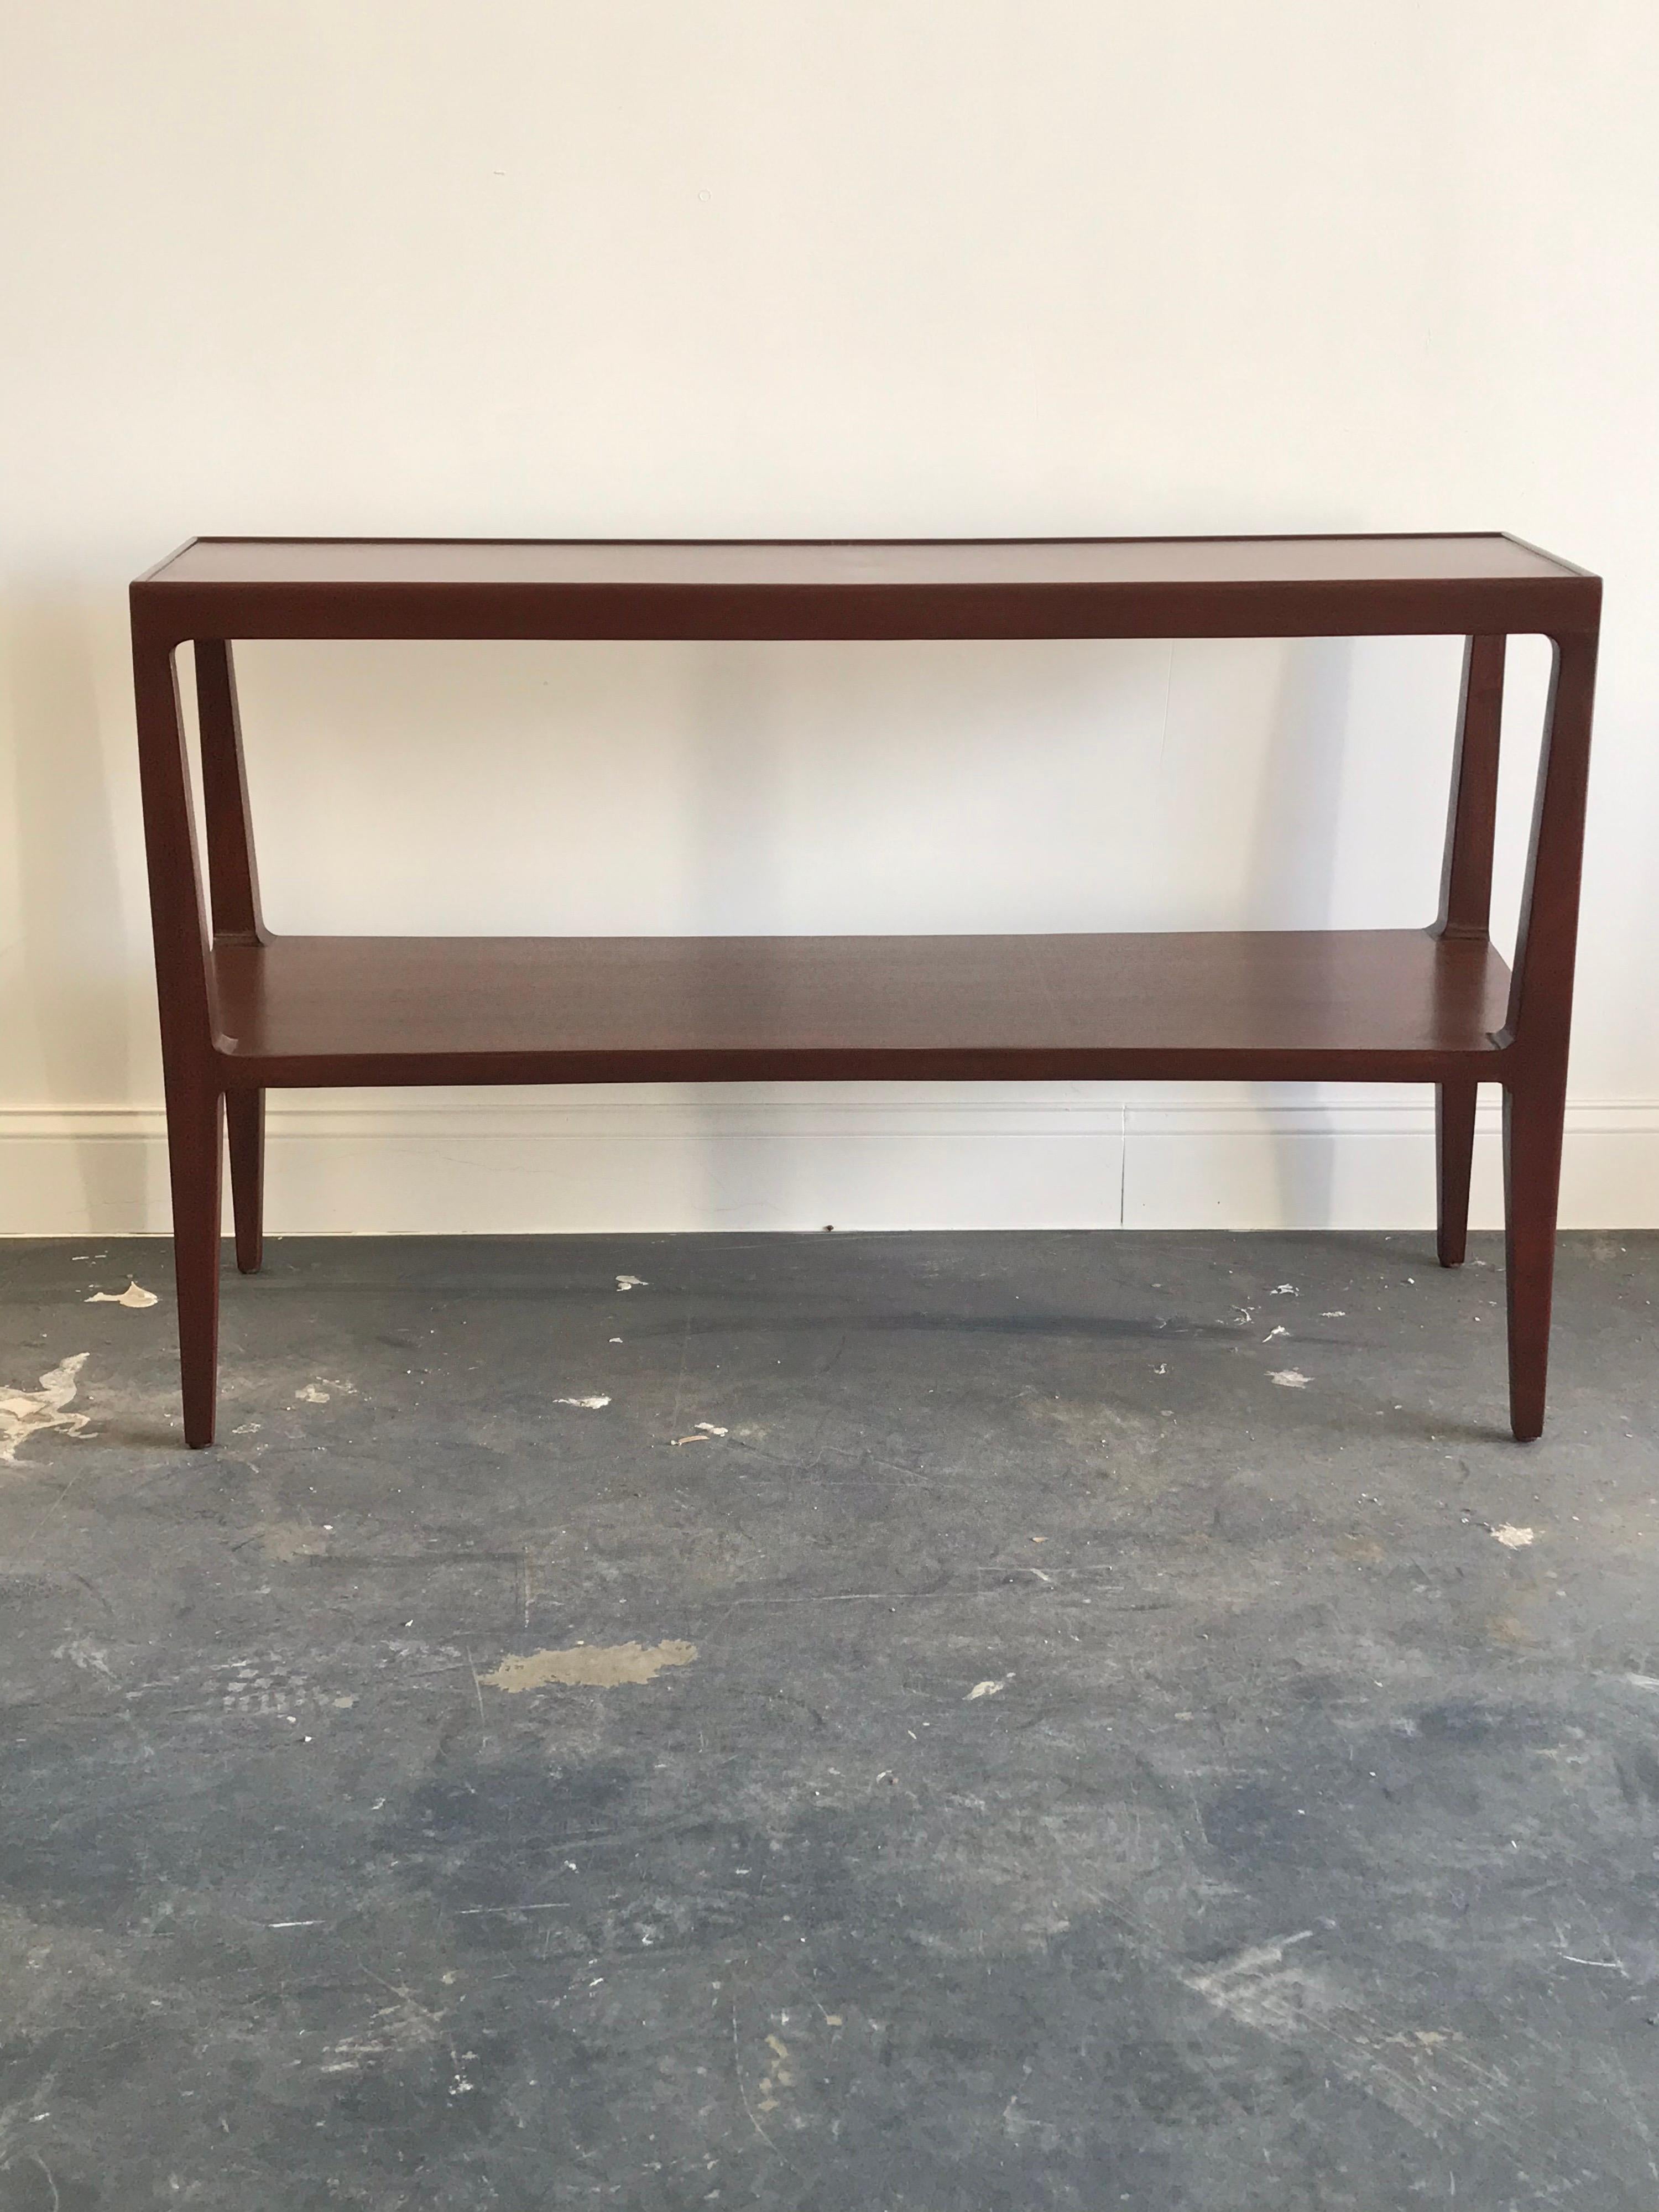 American Stunning Architectural Console Table by Edward Wormley for Dunbar